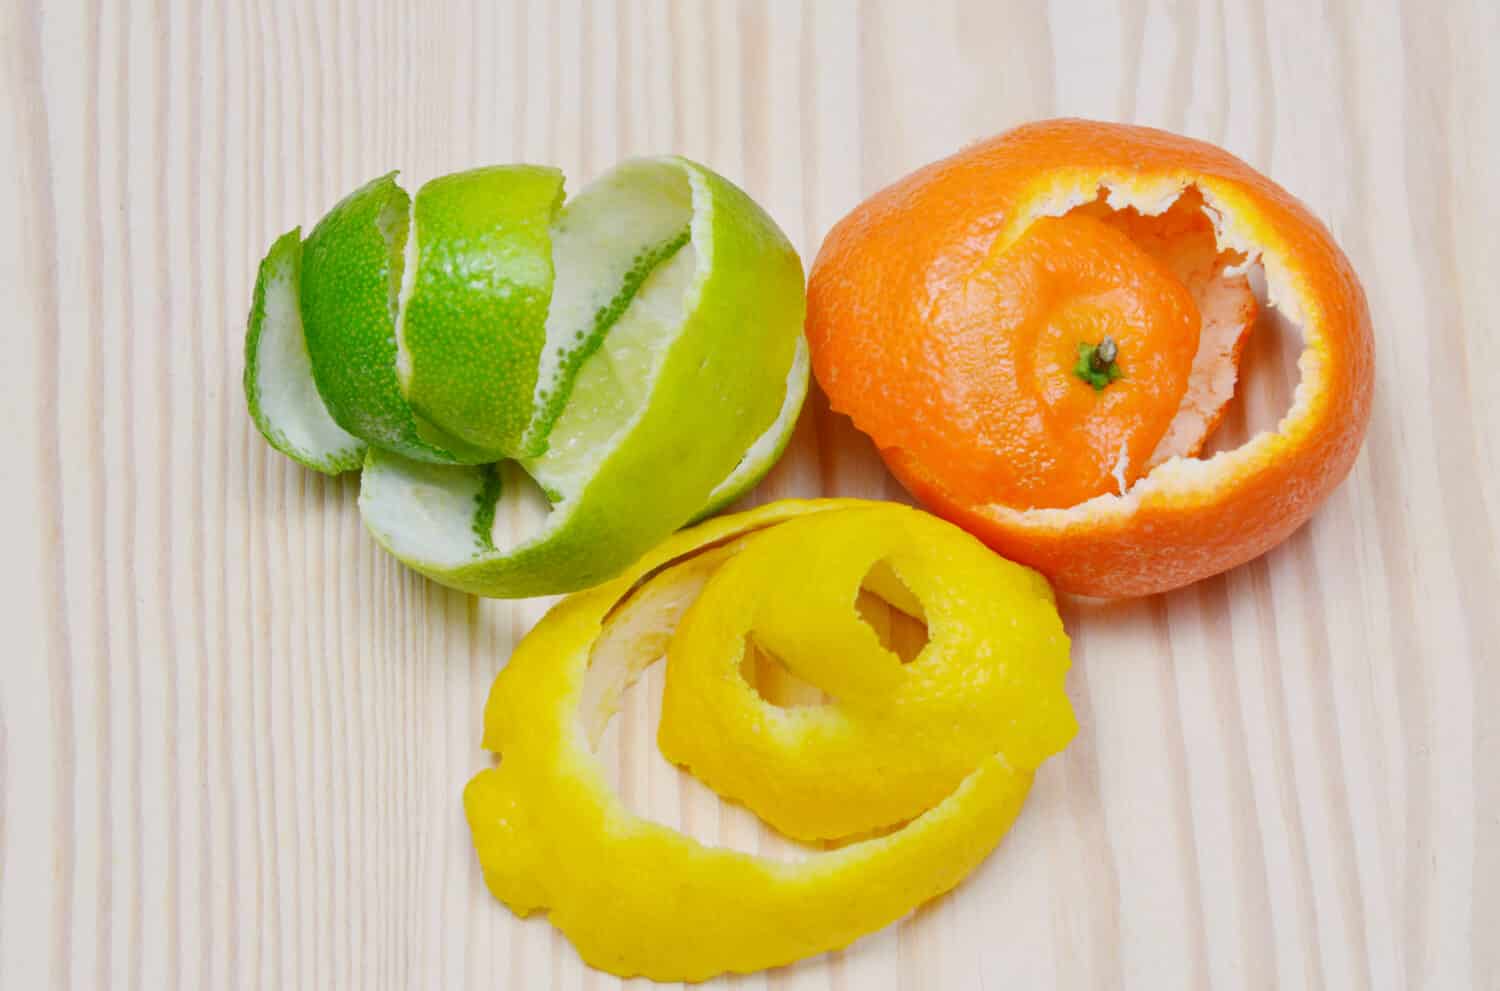 The benefits of citrus peel. clean stainless steel. remove coffee stains. deodorize